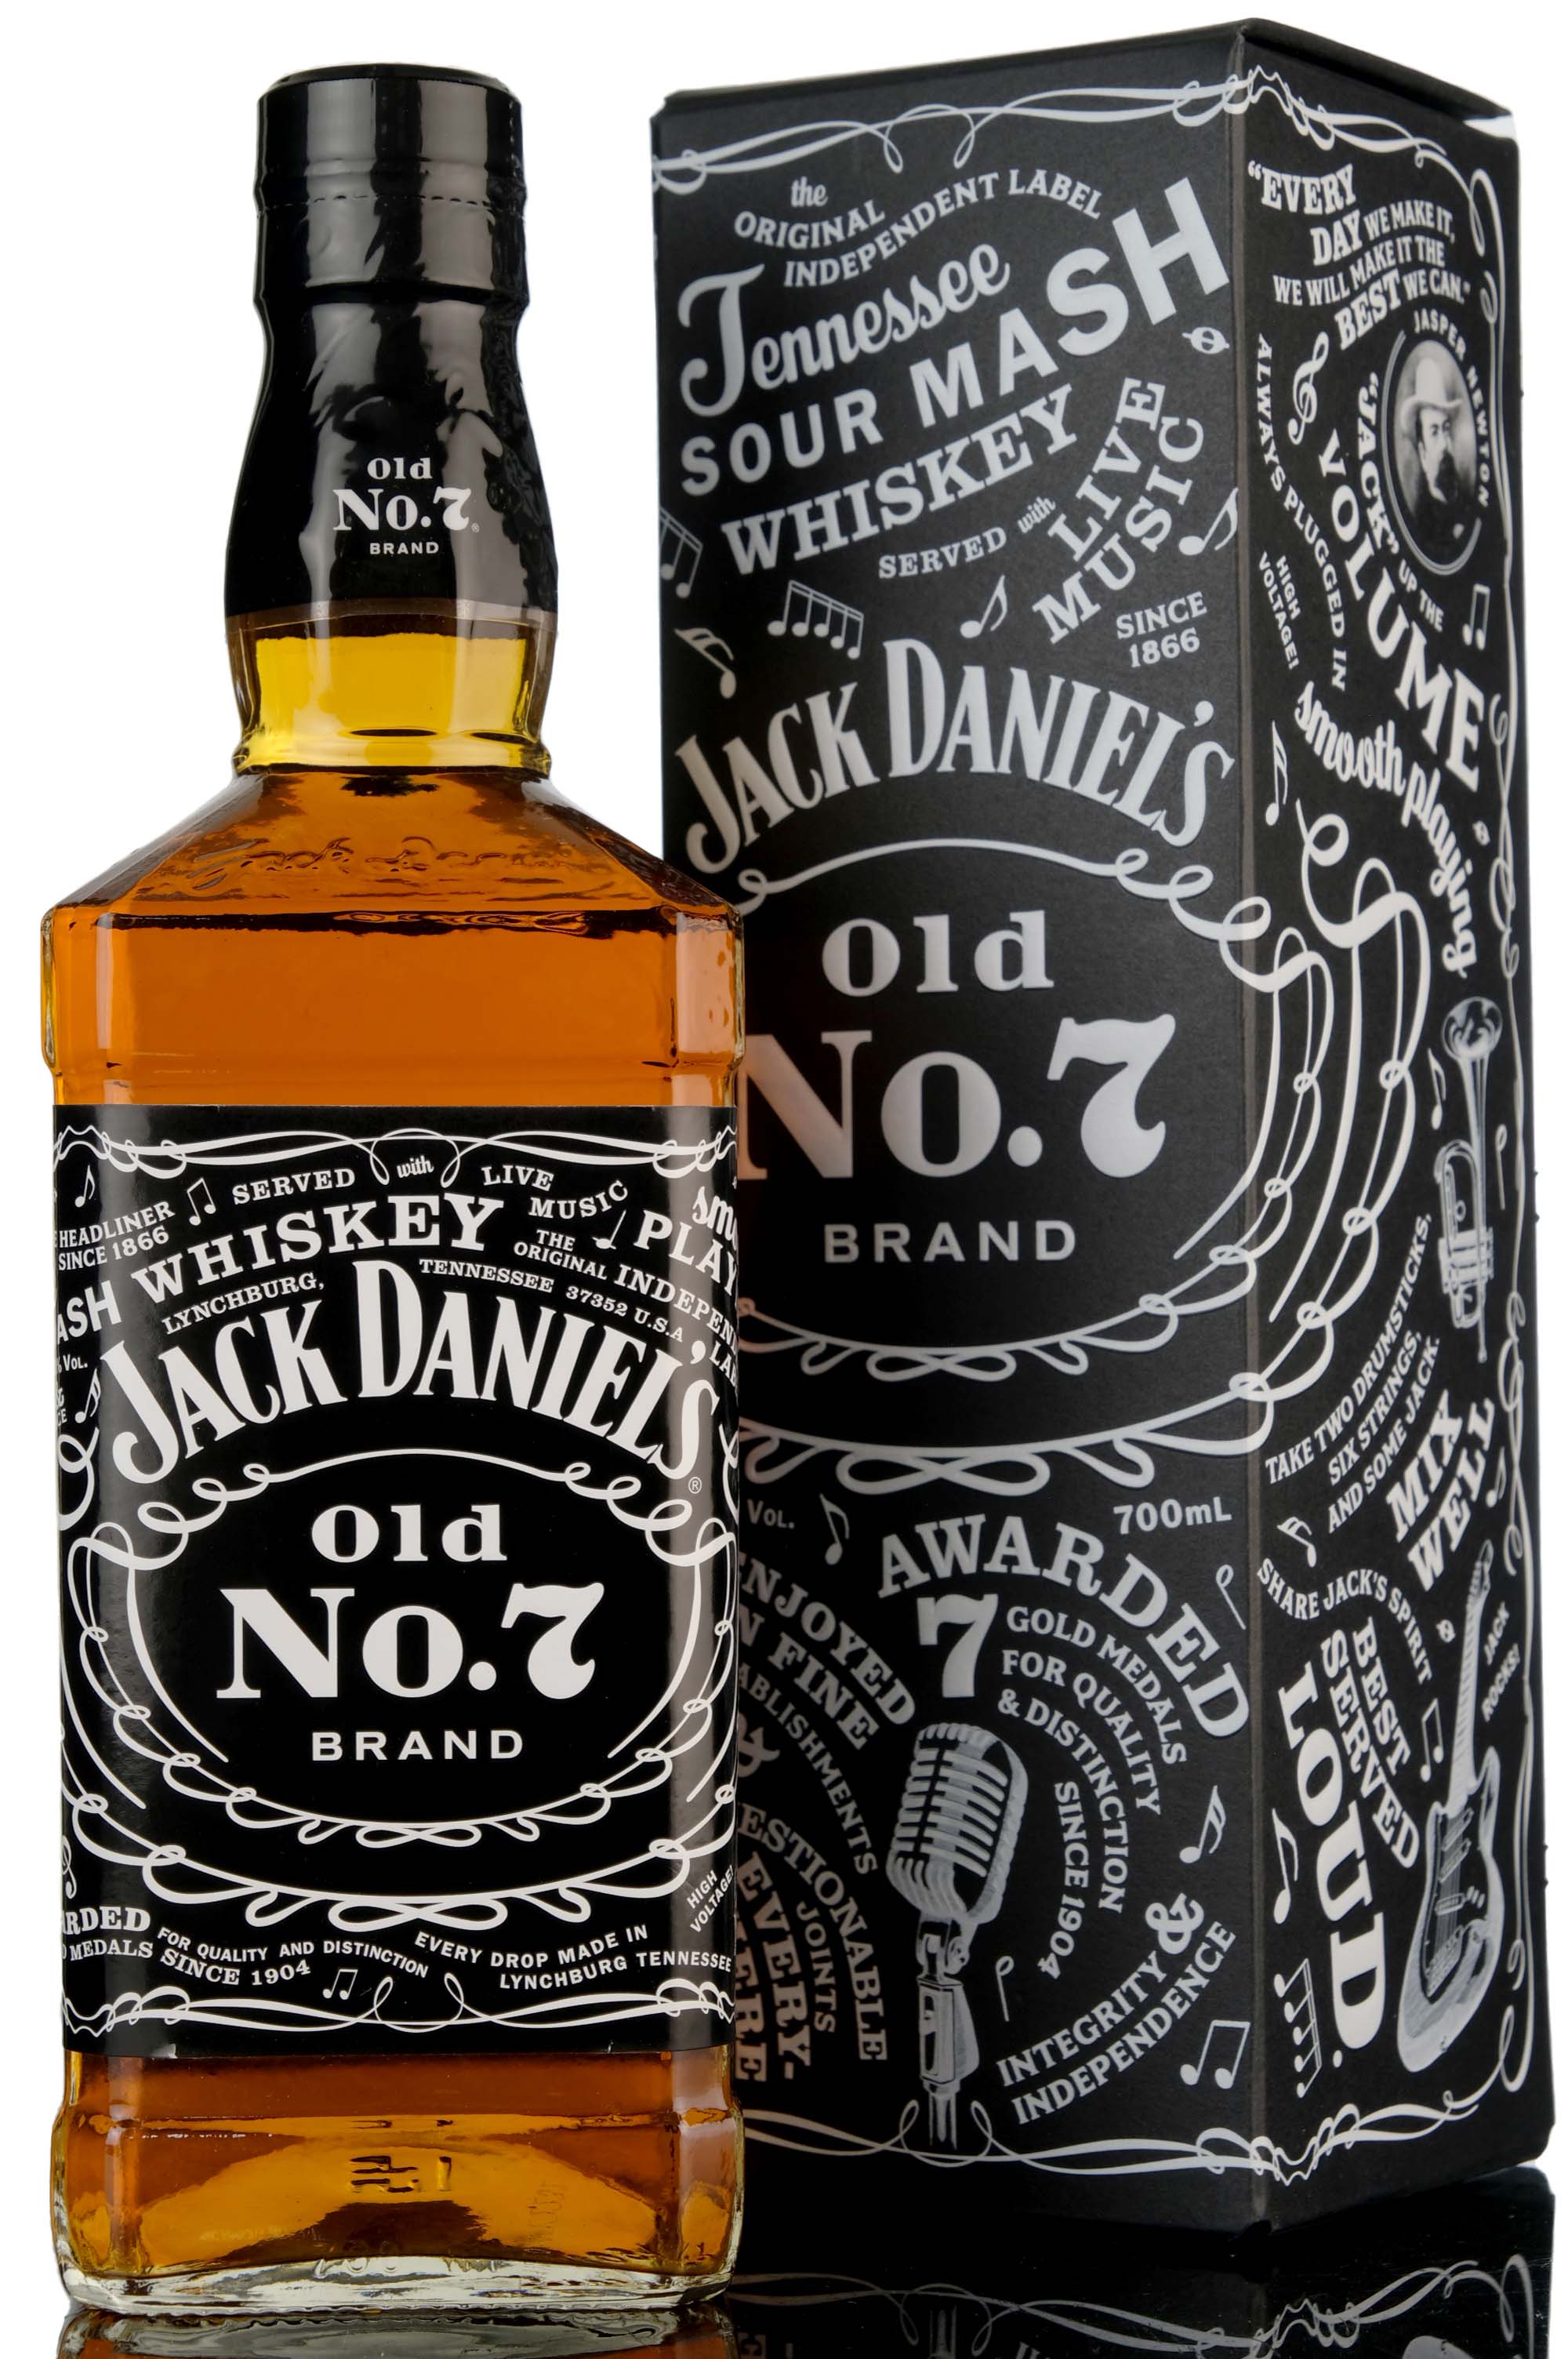 Jack Daniels Old No7 Brand - 155 Years Of Good Music - 2021 Release